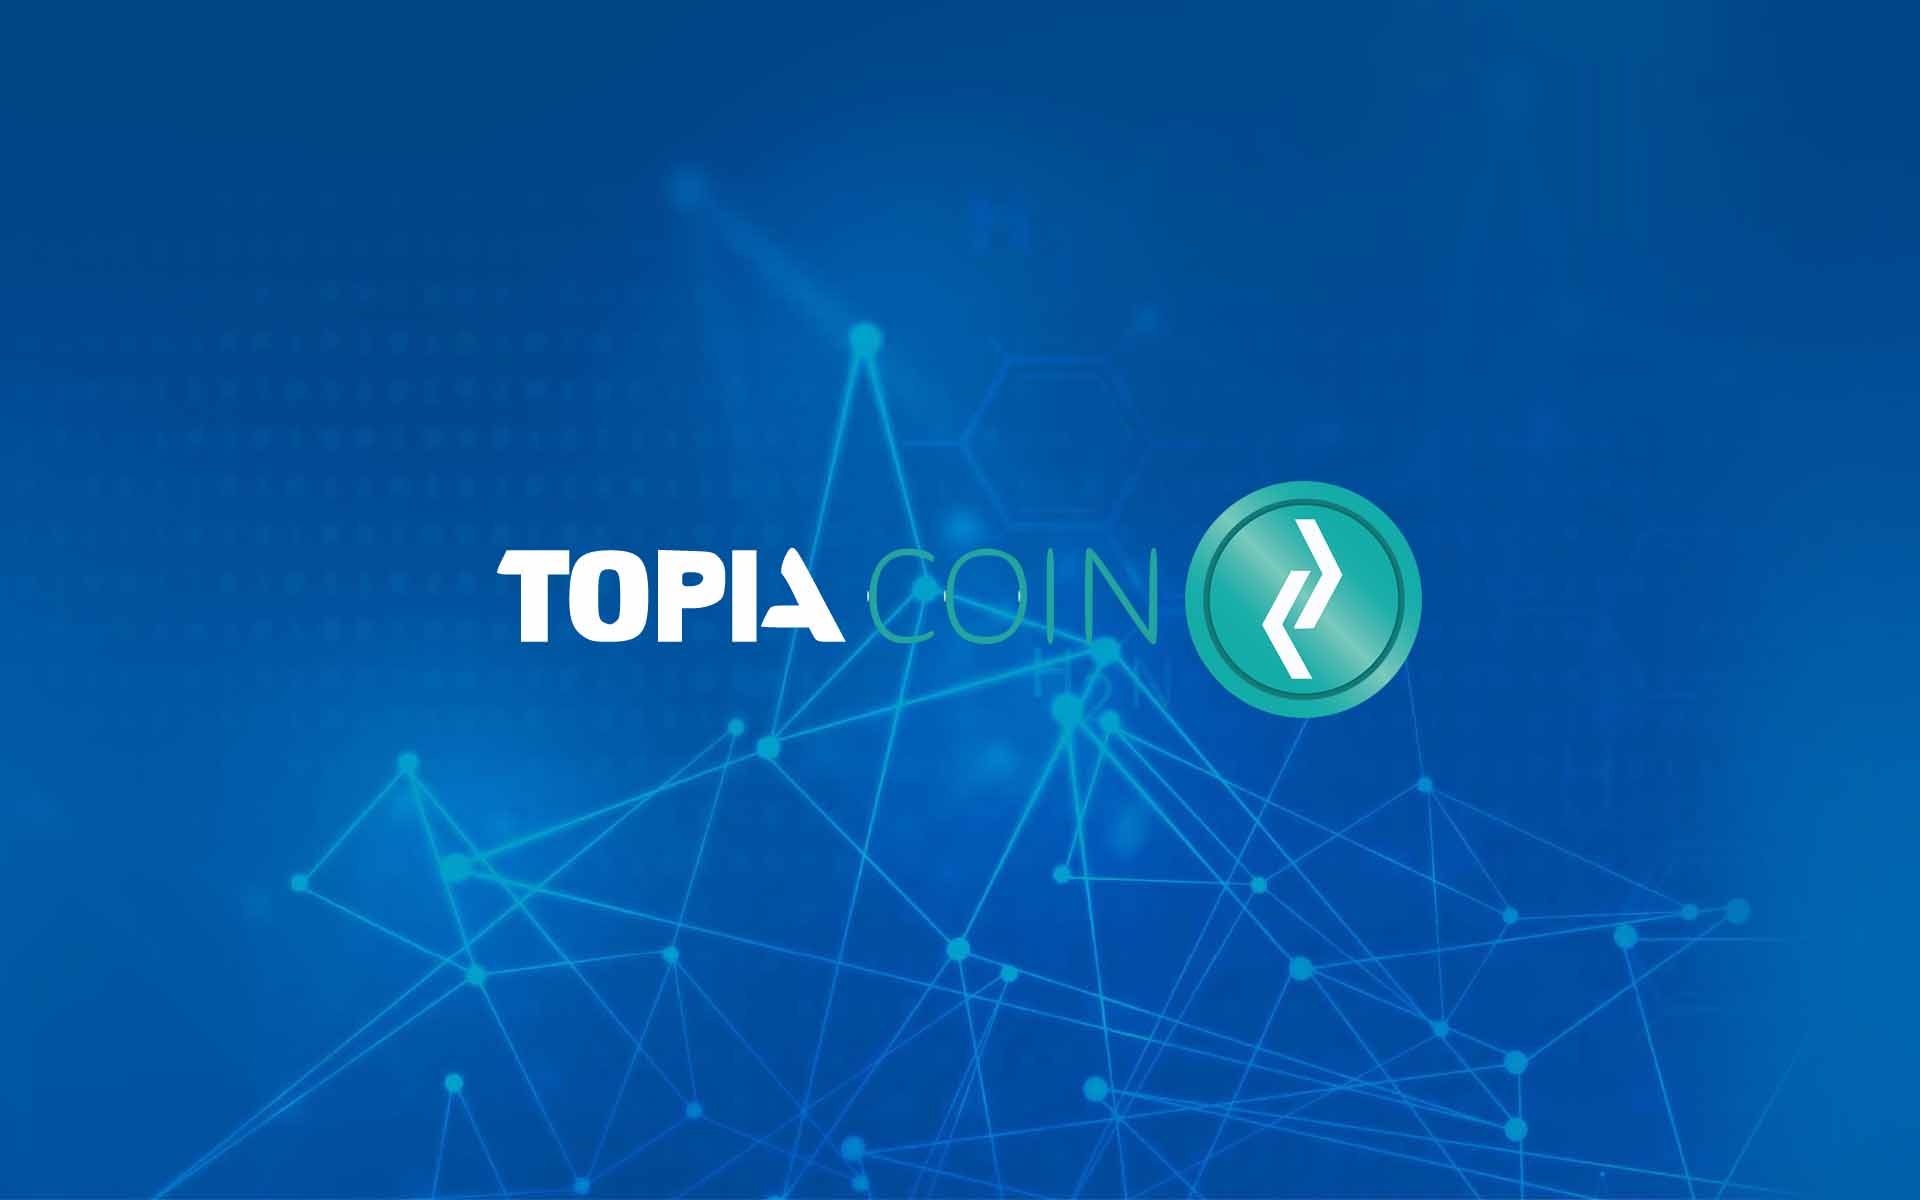 TopiaCoin: A Select Opportunity For Accredited Investors